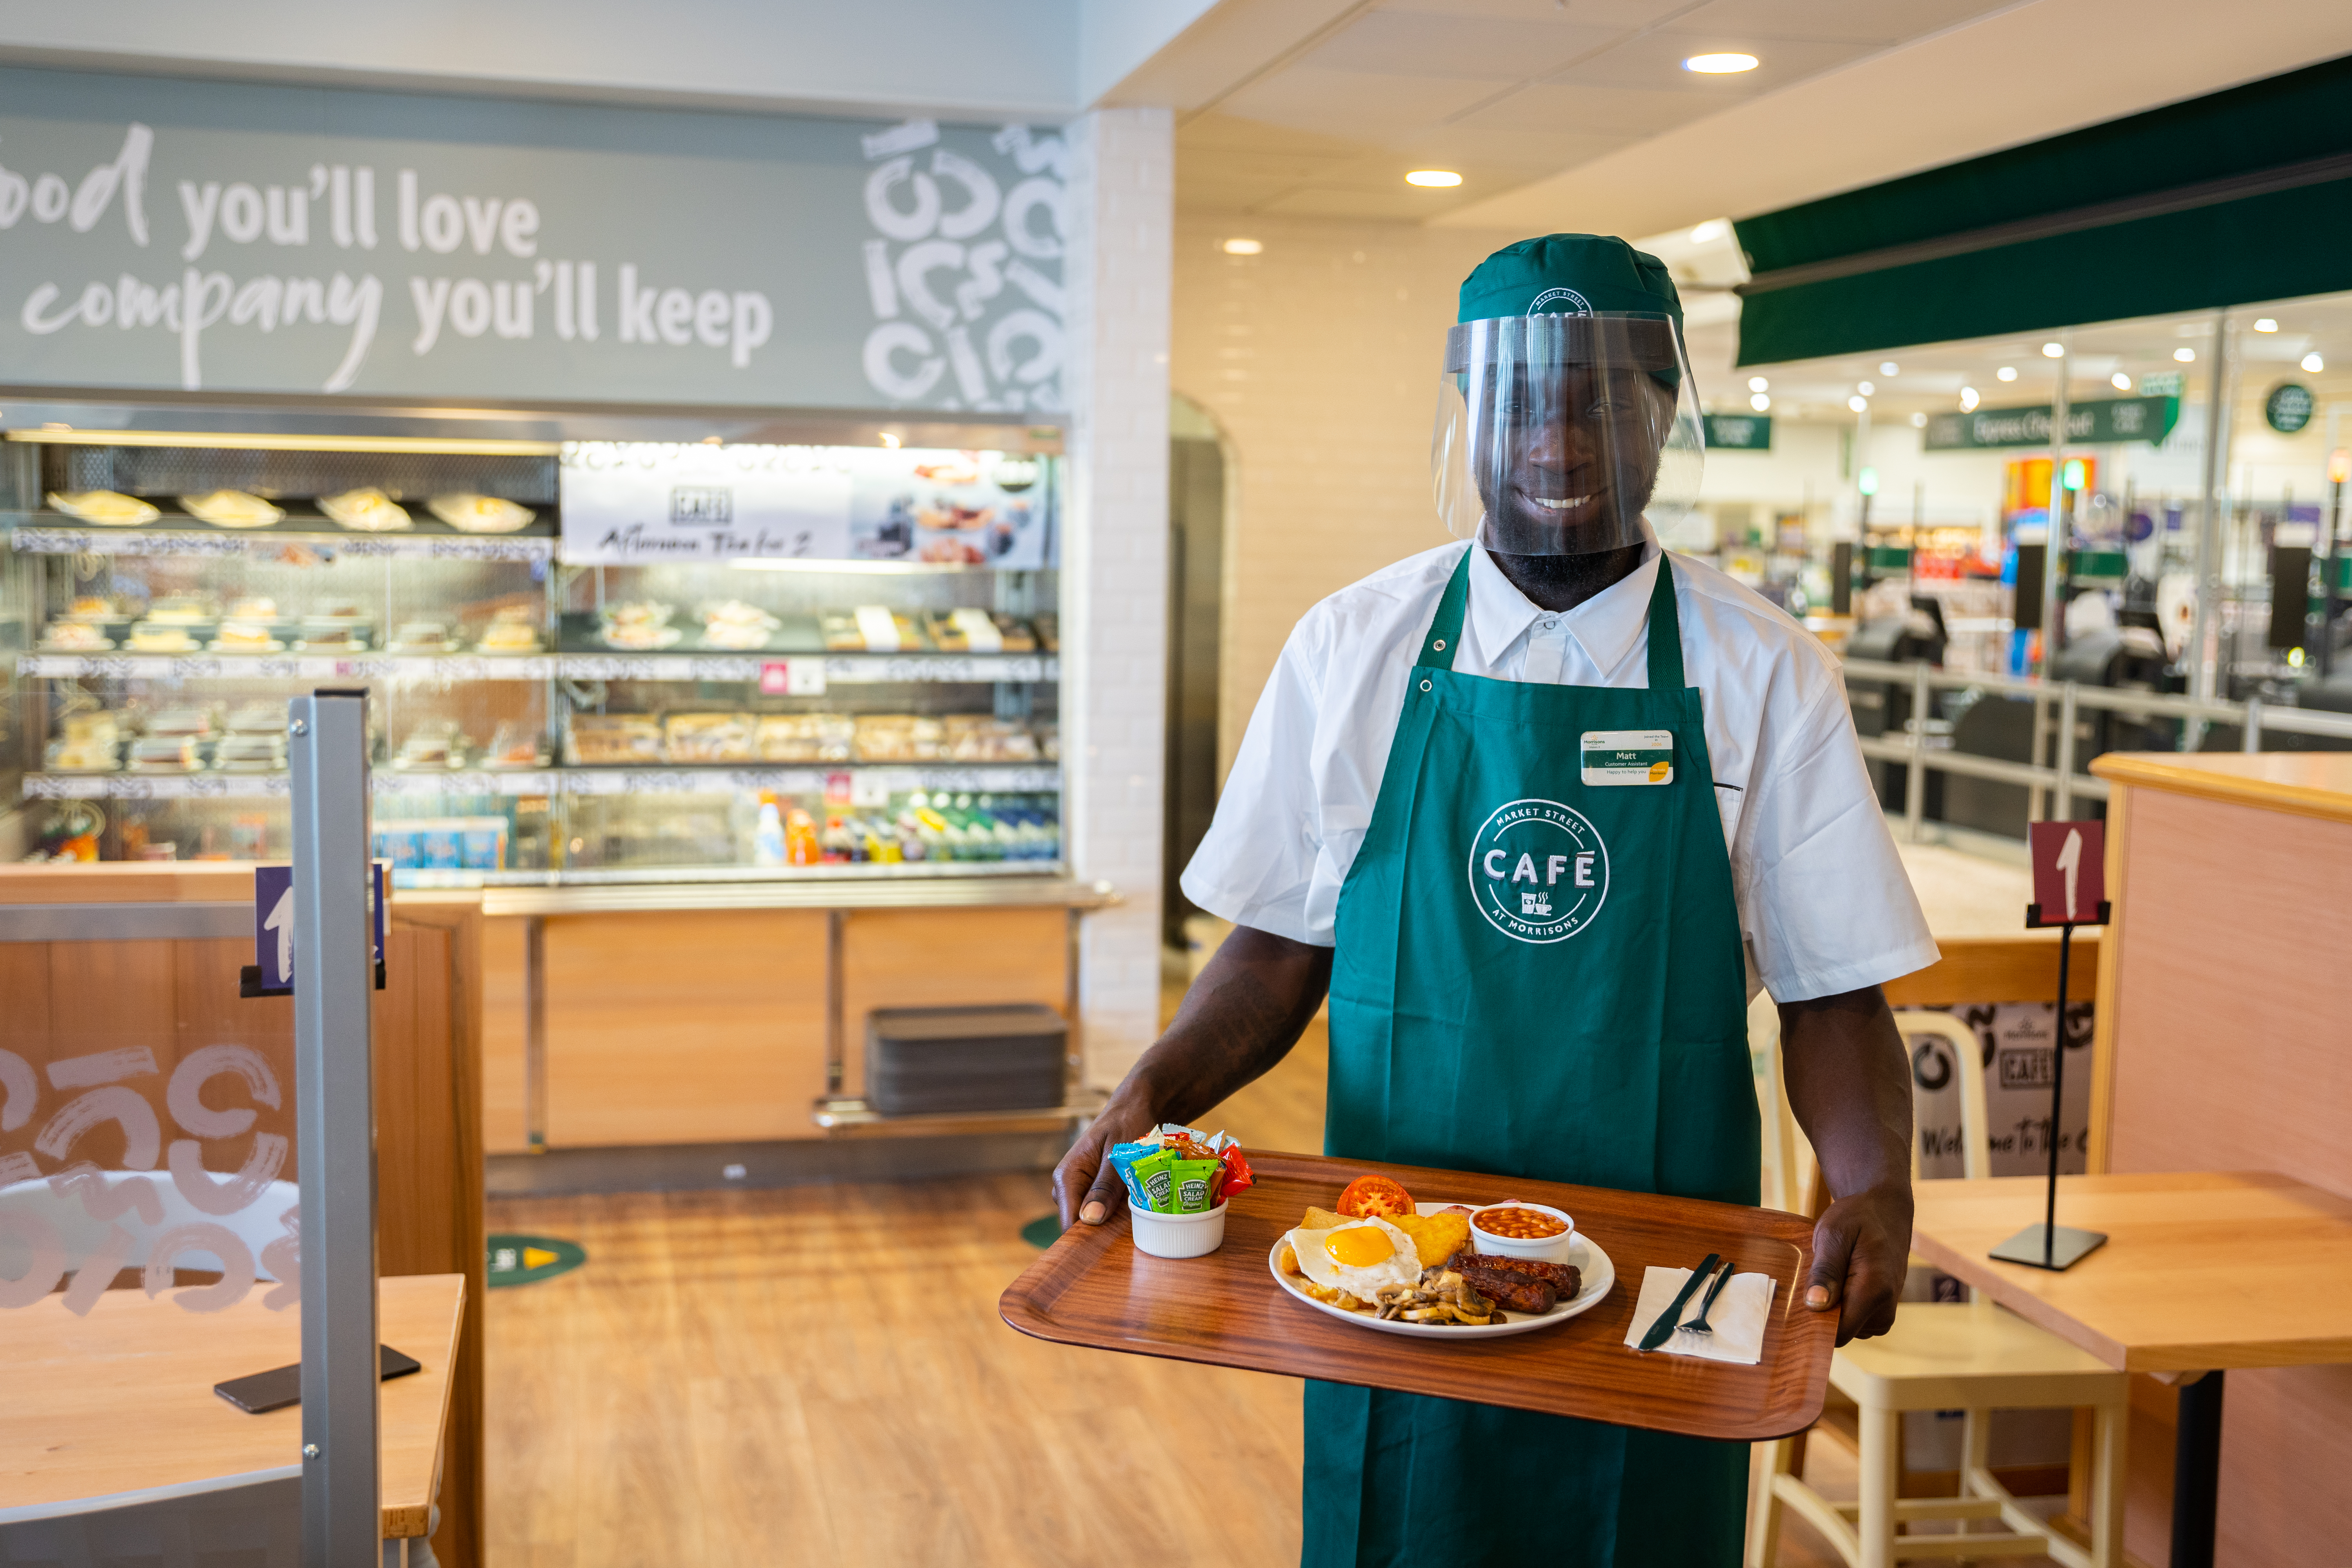 Morrisons cafes open this week after multi-million pound investment in social distancing